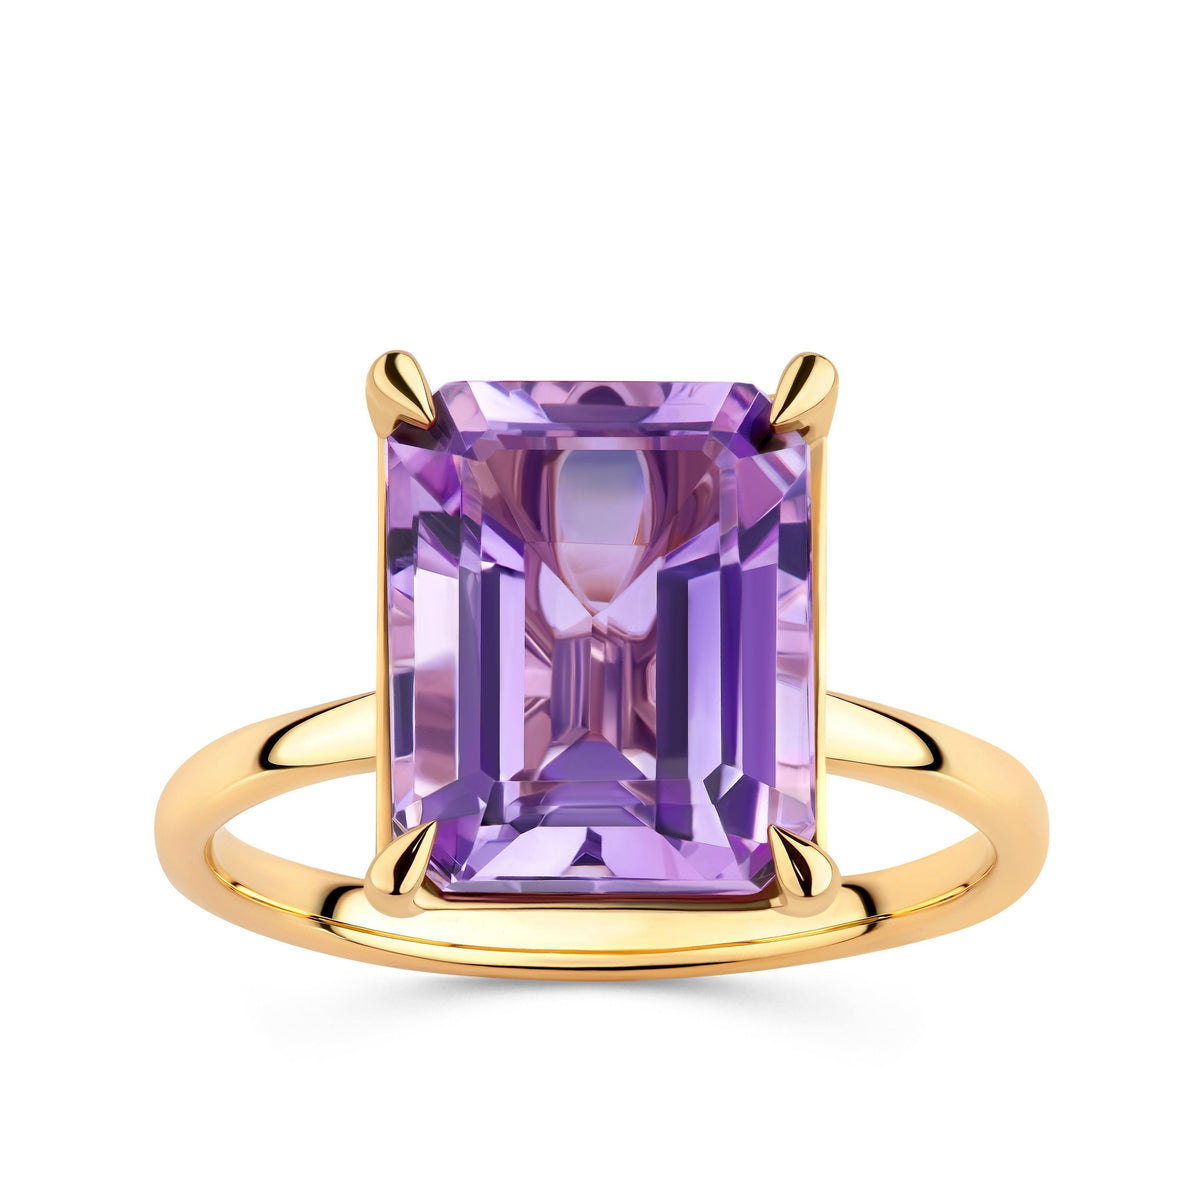 Emerald Cut Amethyst Cocktail Ring in 9ct Yellow Gold - Wallace Bishop